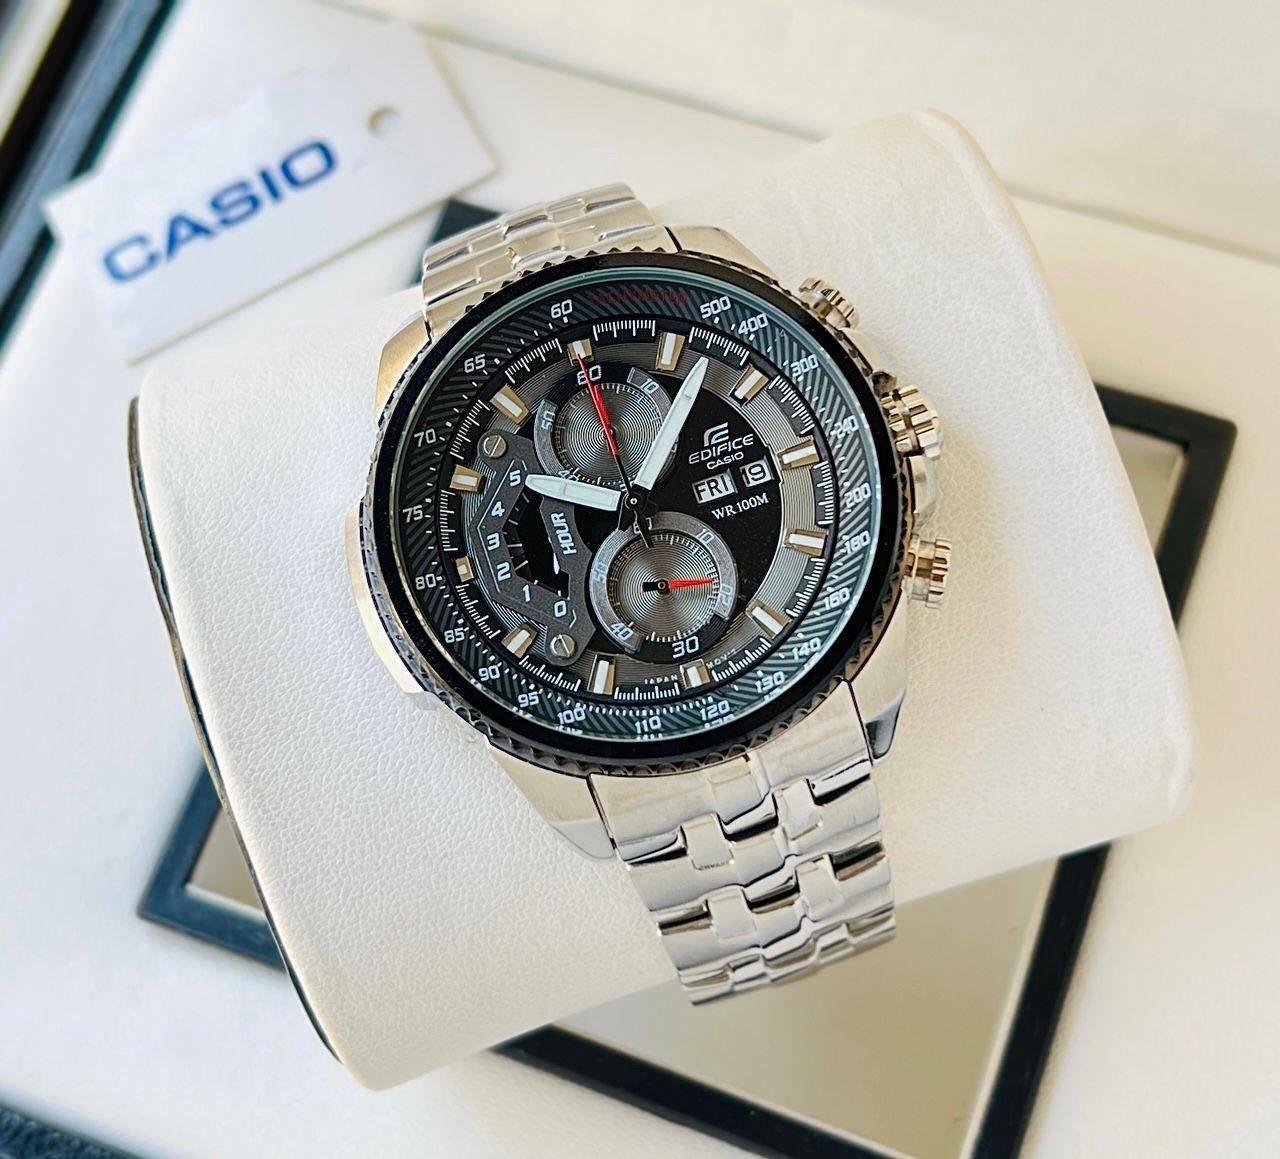 Casio EDIFICE EF-539D-1AVUDF Sports Chronograph Ion-Plated... for Rs.9,637  for sale from a Seller on Chrono24